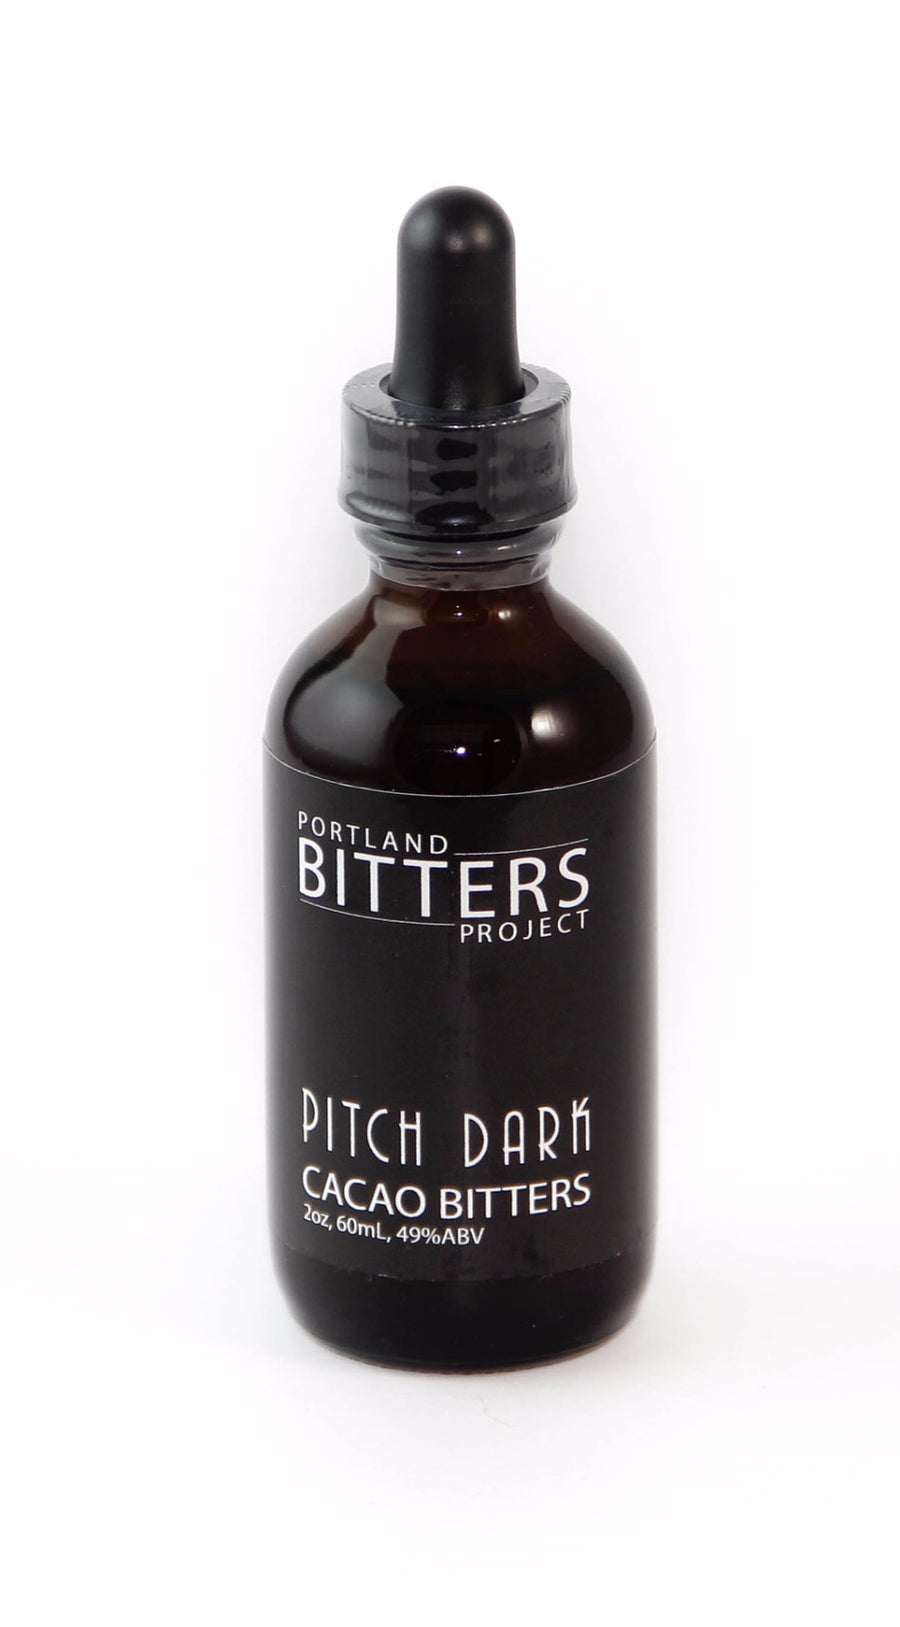 Portland Bitters Project Pitch Dark Cacao Bitters